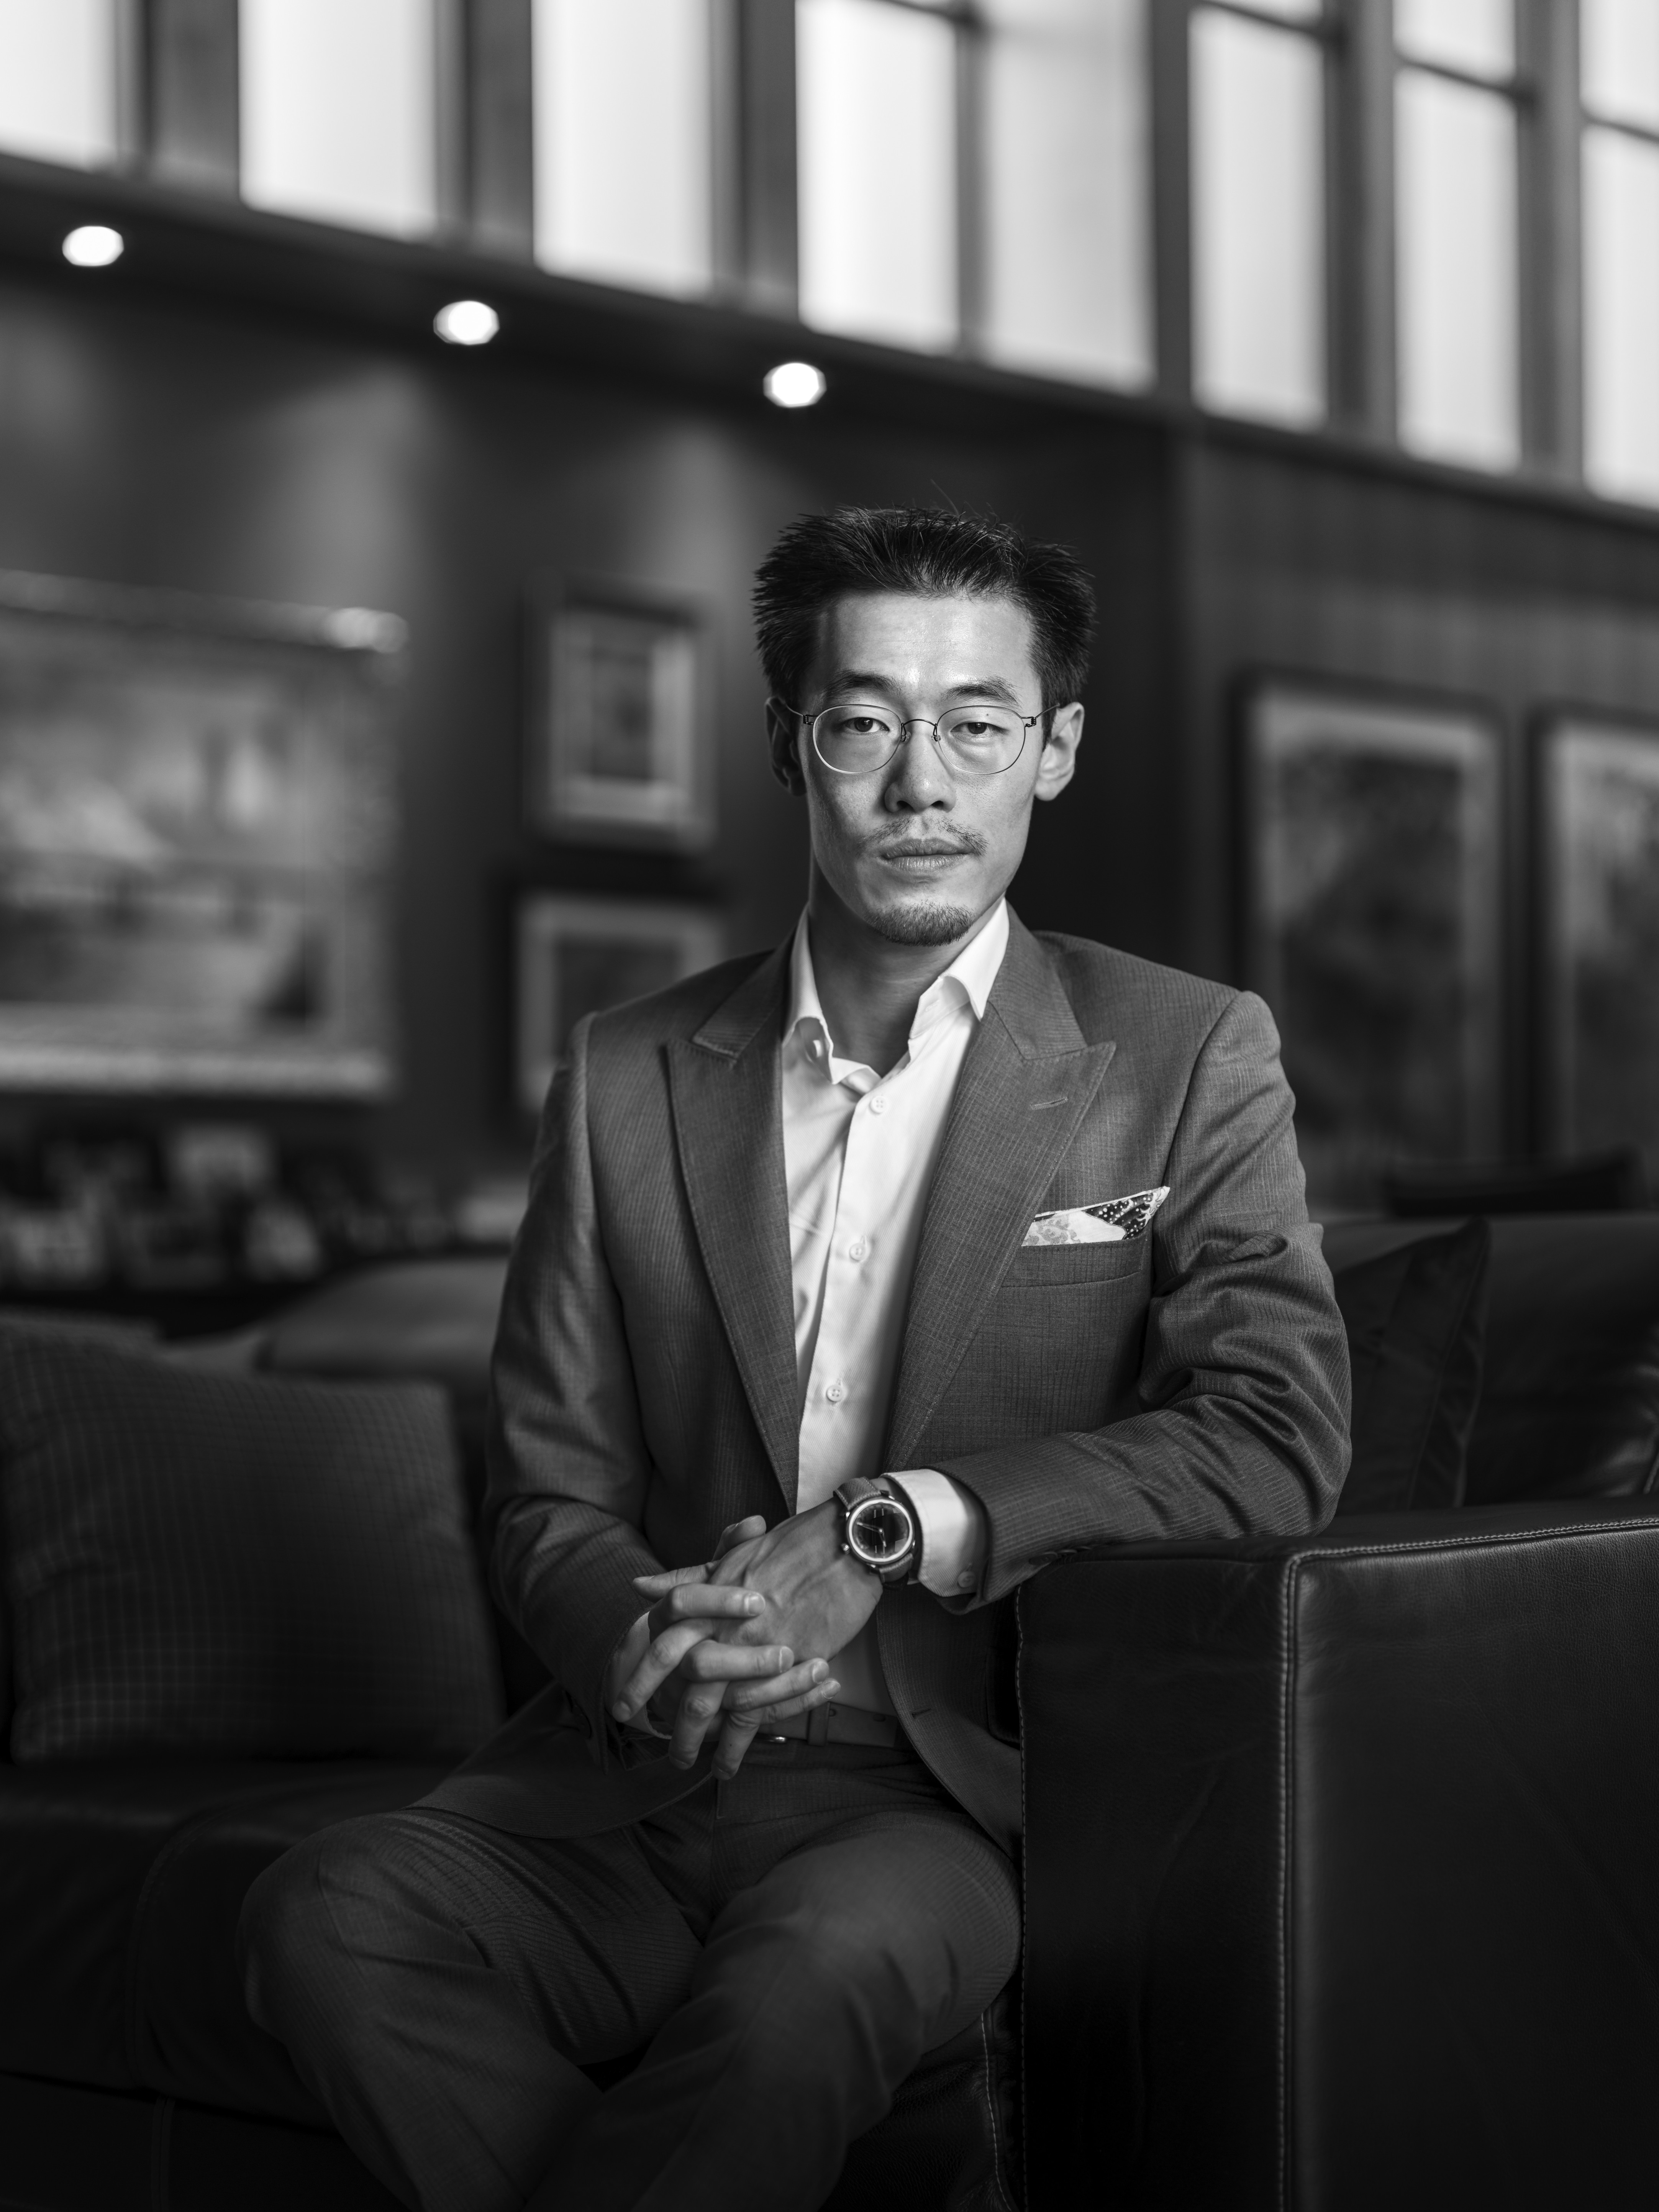 Ming was started by a bunch of friends to make watches of the sort they would want to buy. Their first model sold out within hours; their second is in line for a prize at the Oscars of watchmaking